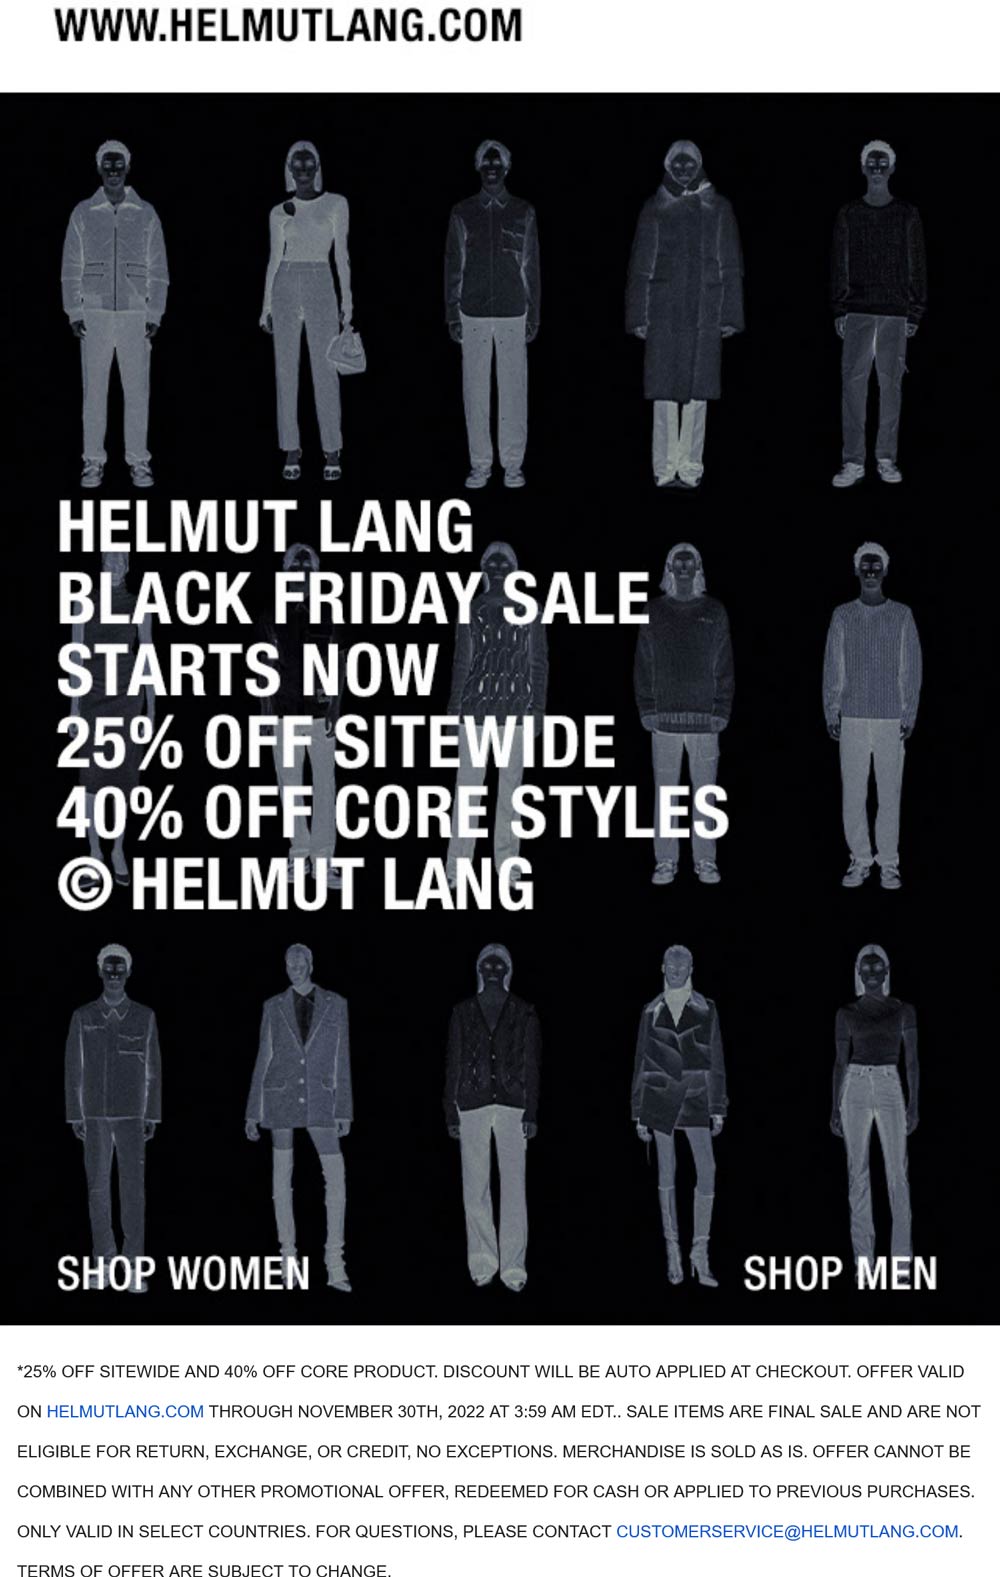 Helmut Lang stores Coupon  25-40% off everything at Helmut Lang, ditto online #helmutlang 